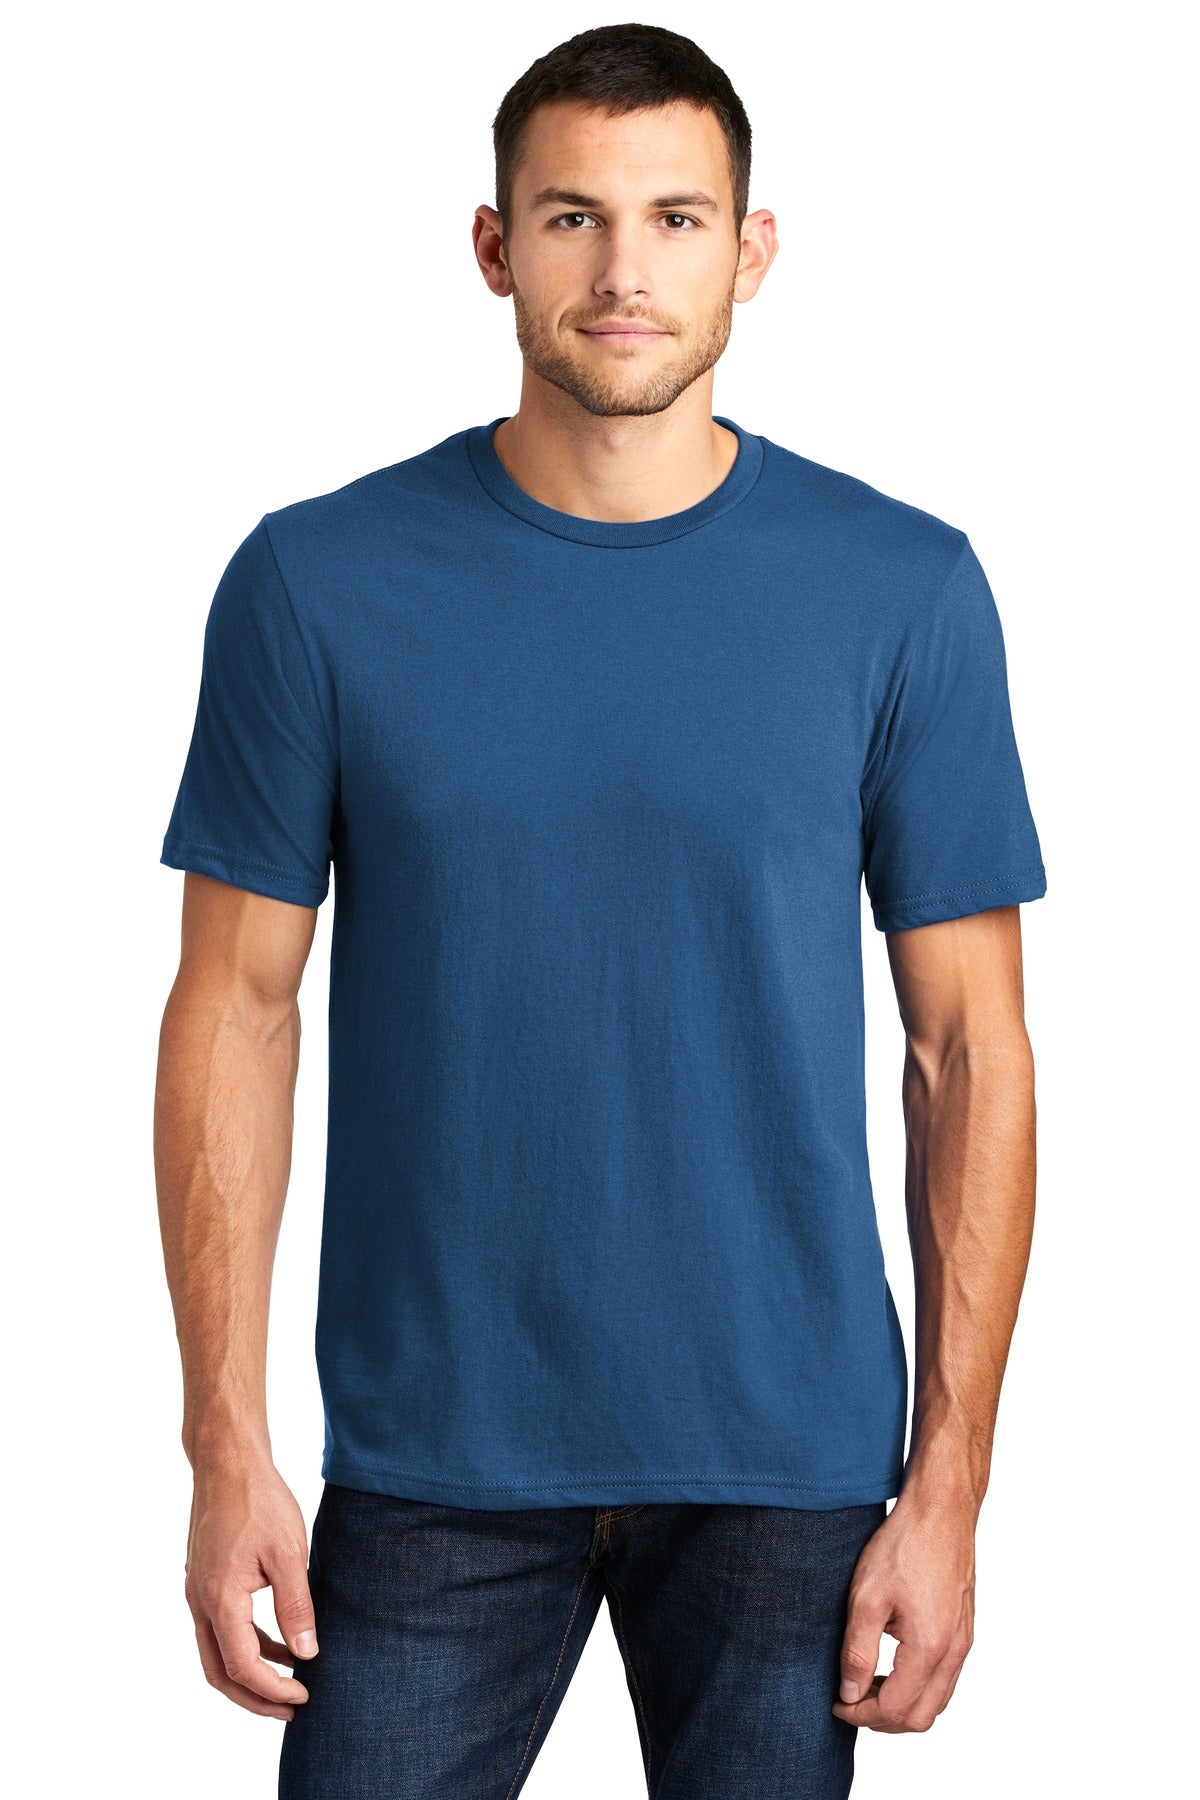 District® Very Important Tee®. DT6000 [Maritime Blue] - DFW Impression